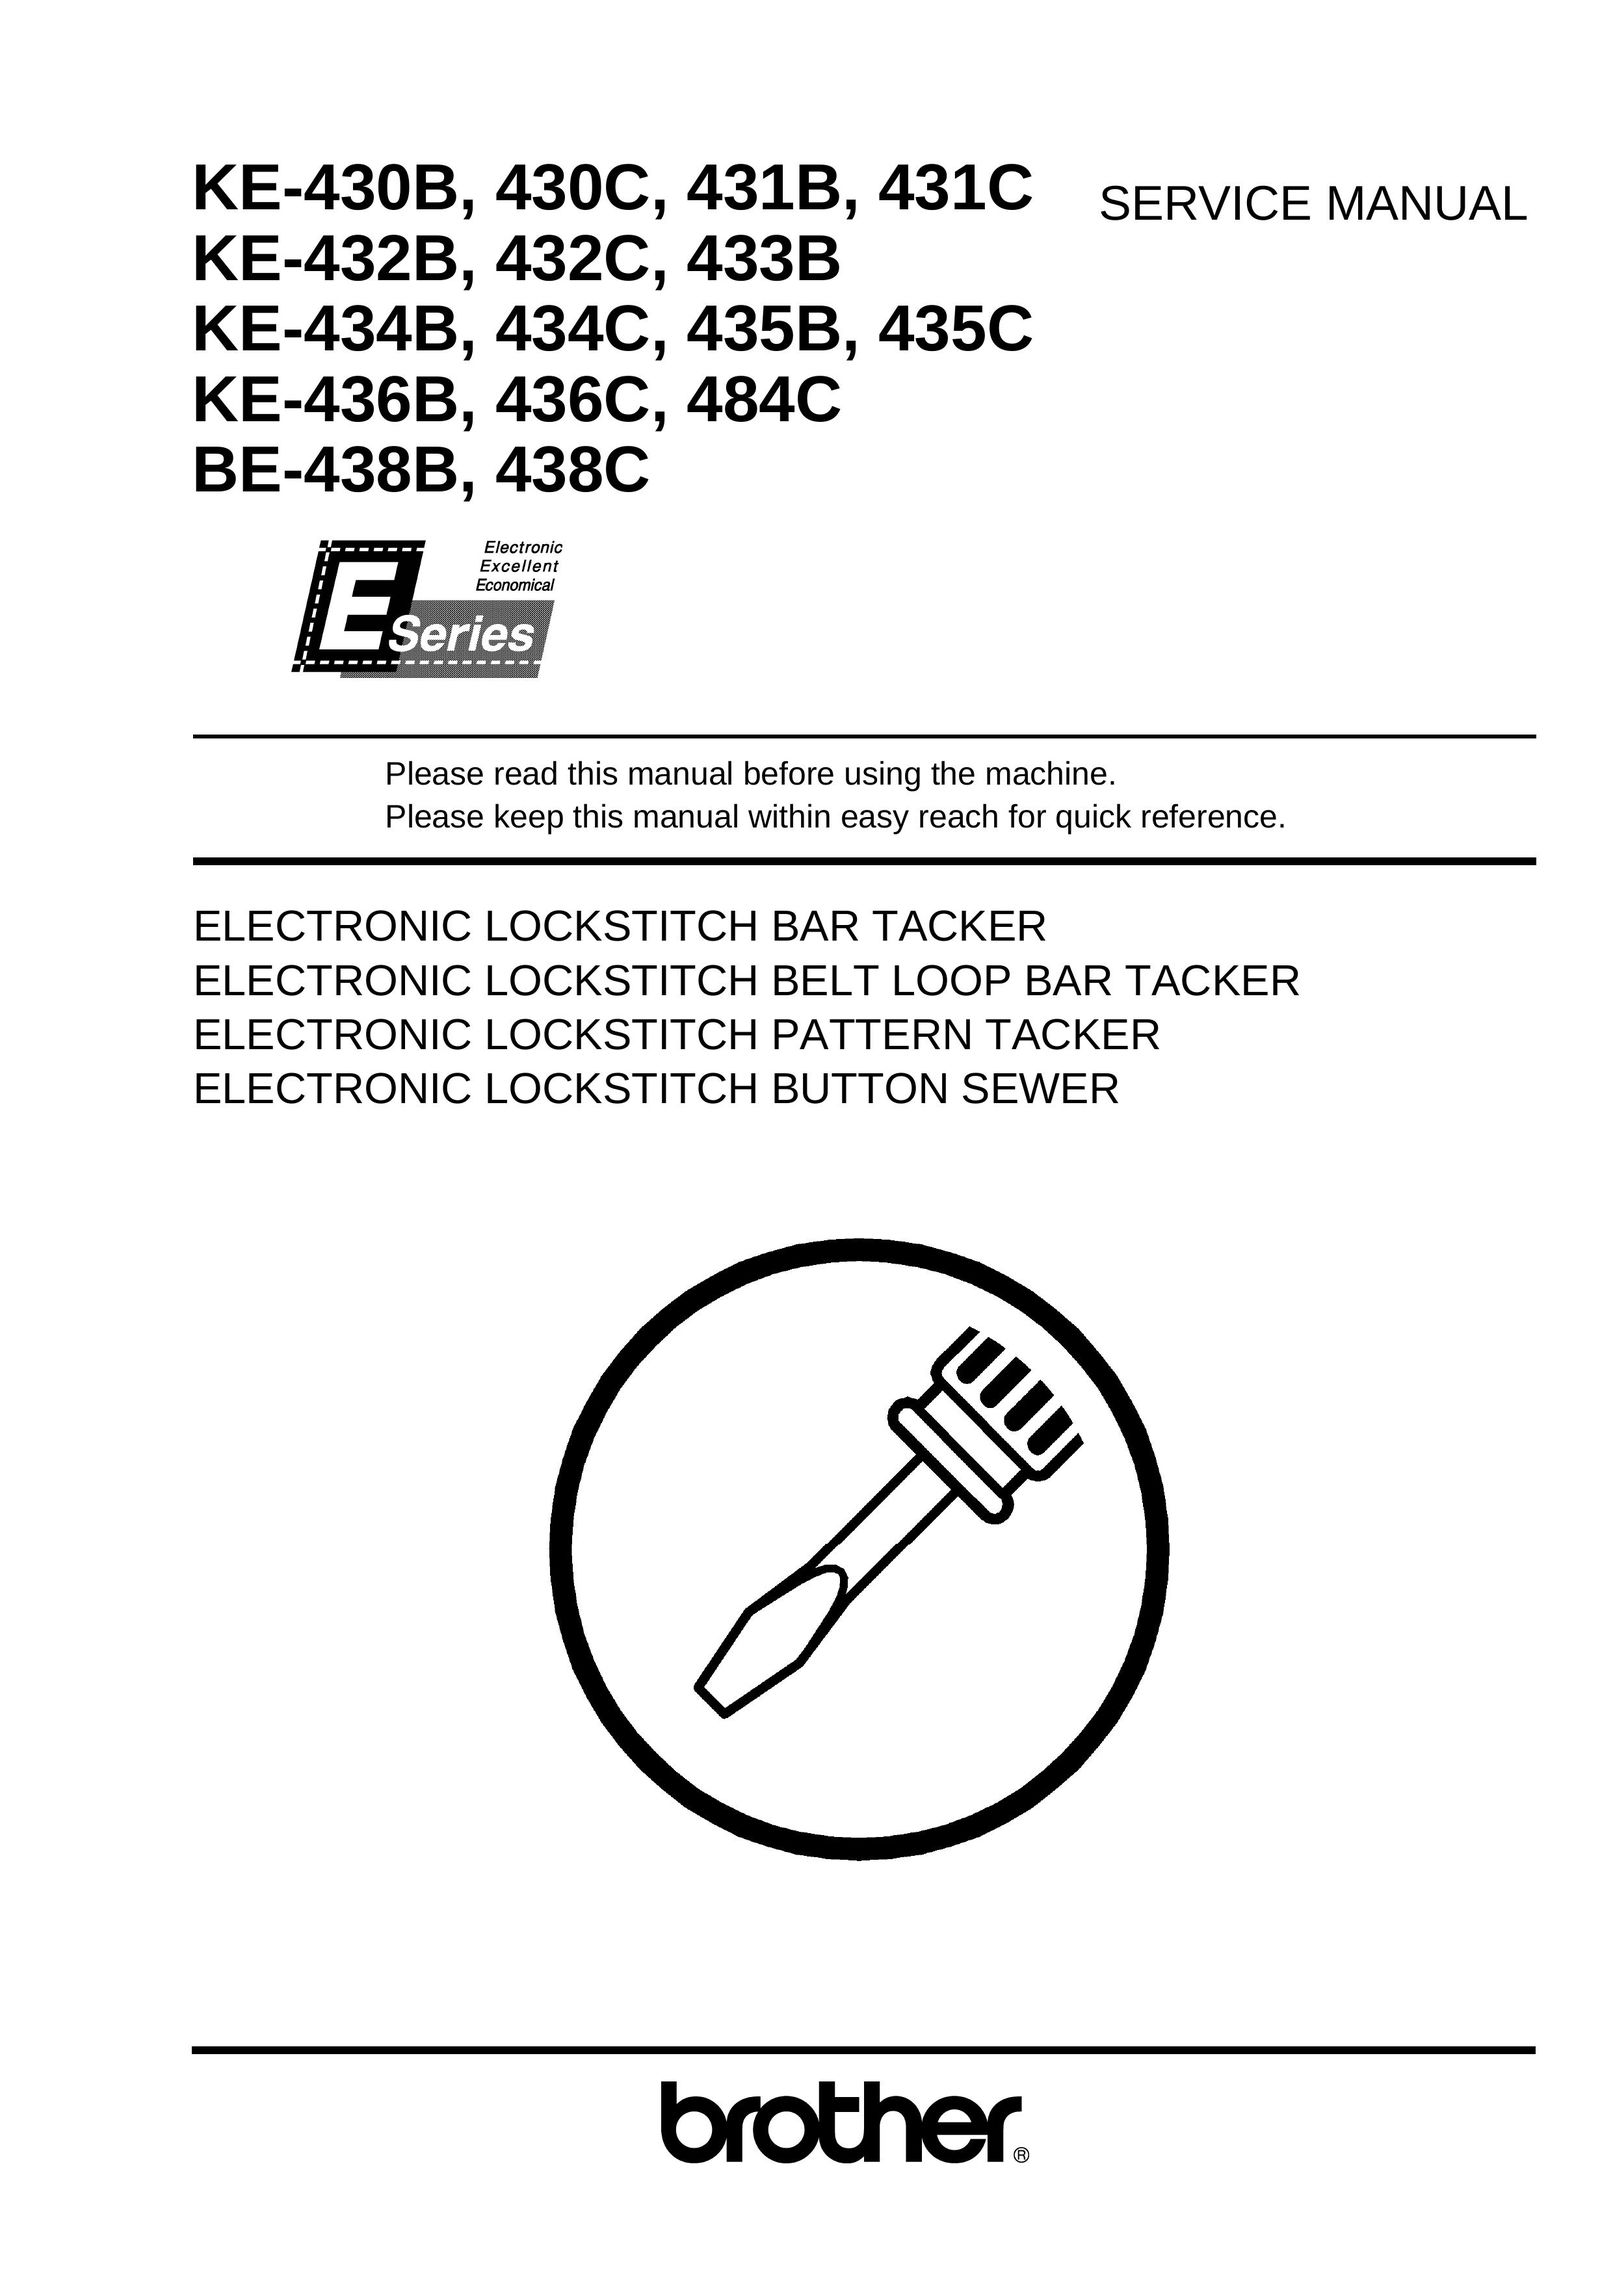 Brother 436C Sewing Machine User Manual